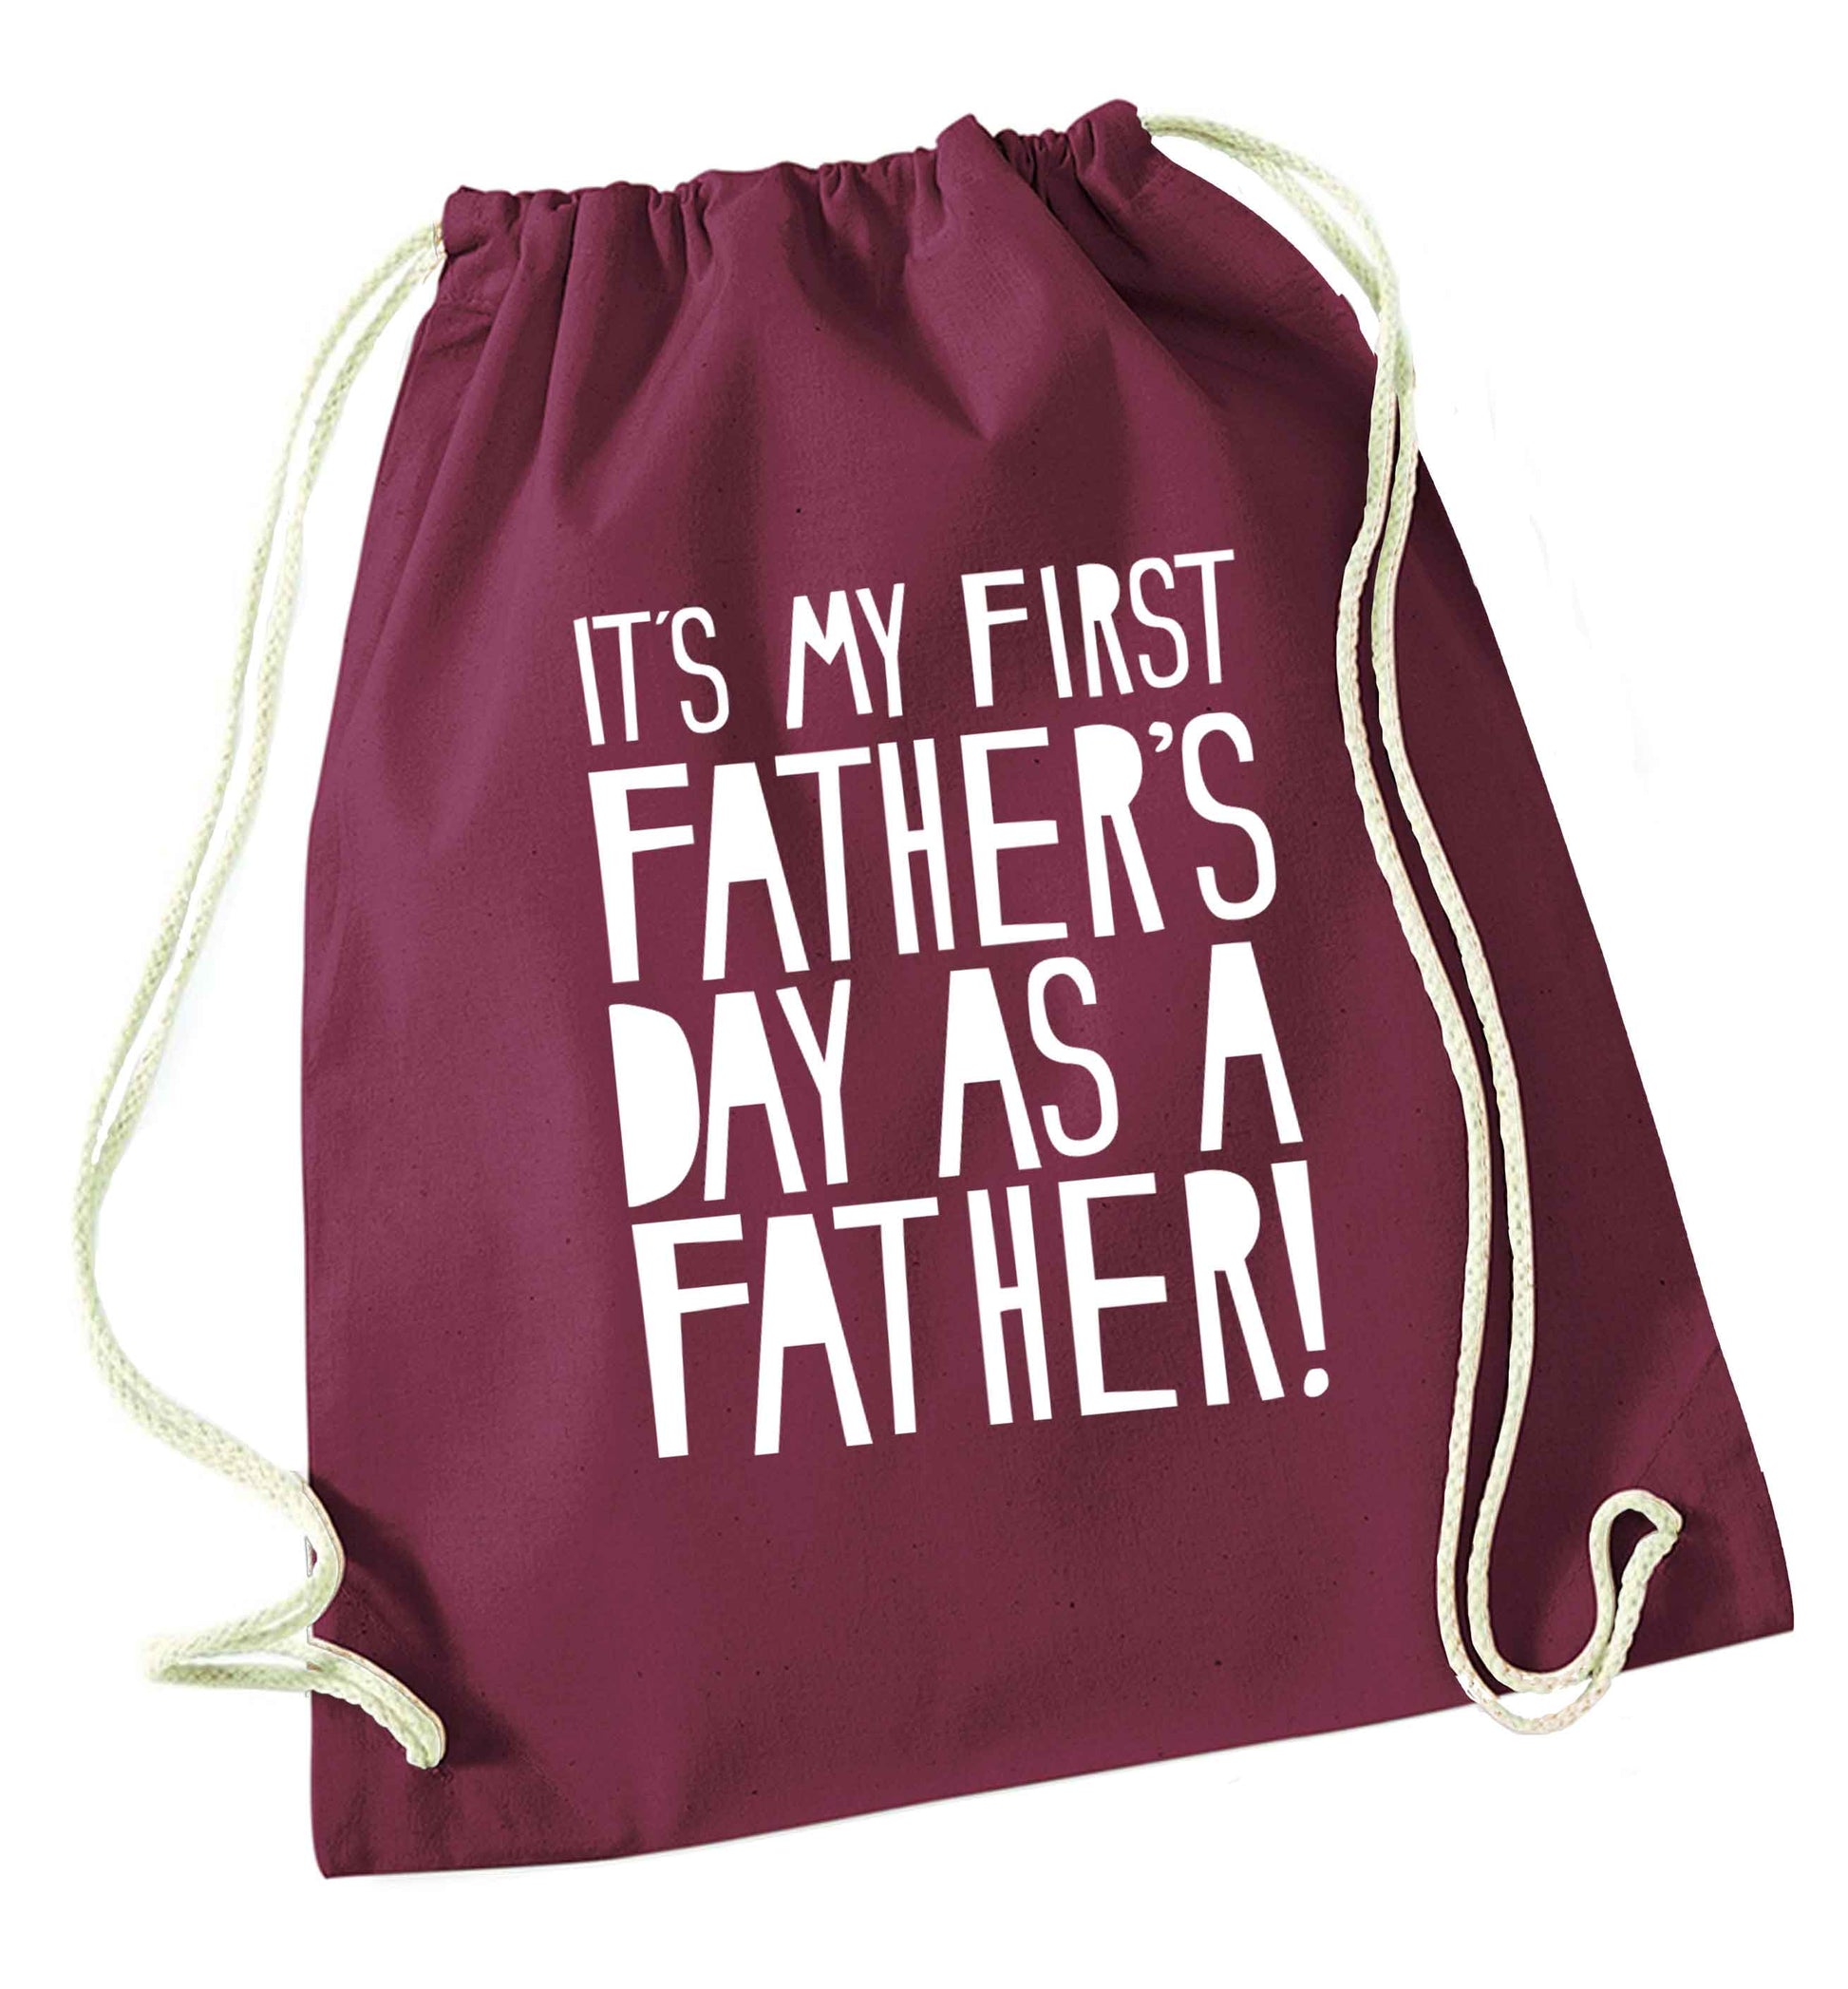 It's my first father's day as a father! maroon drawstring bag